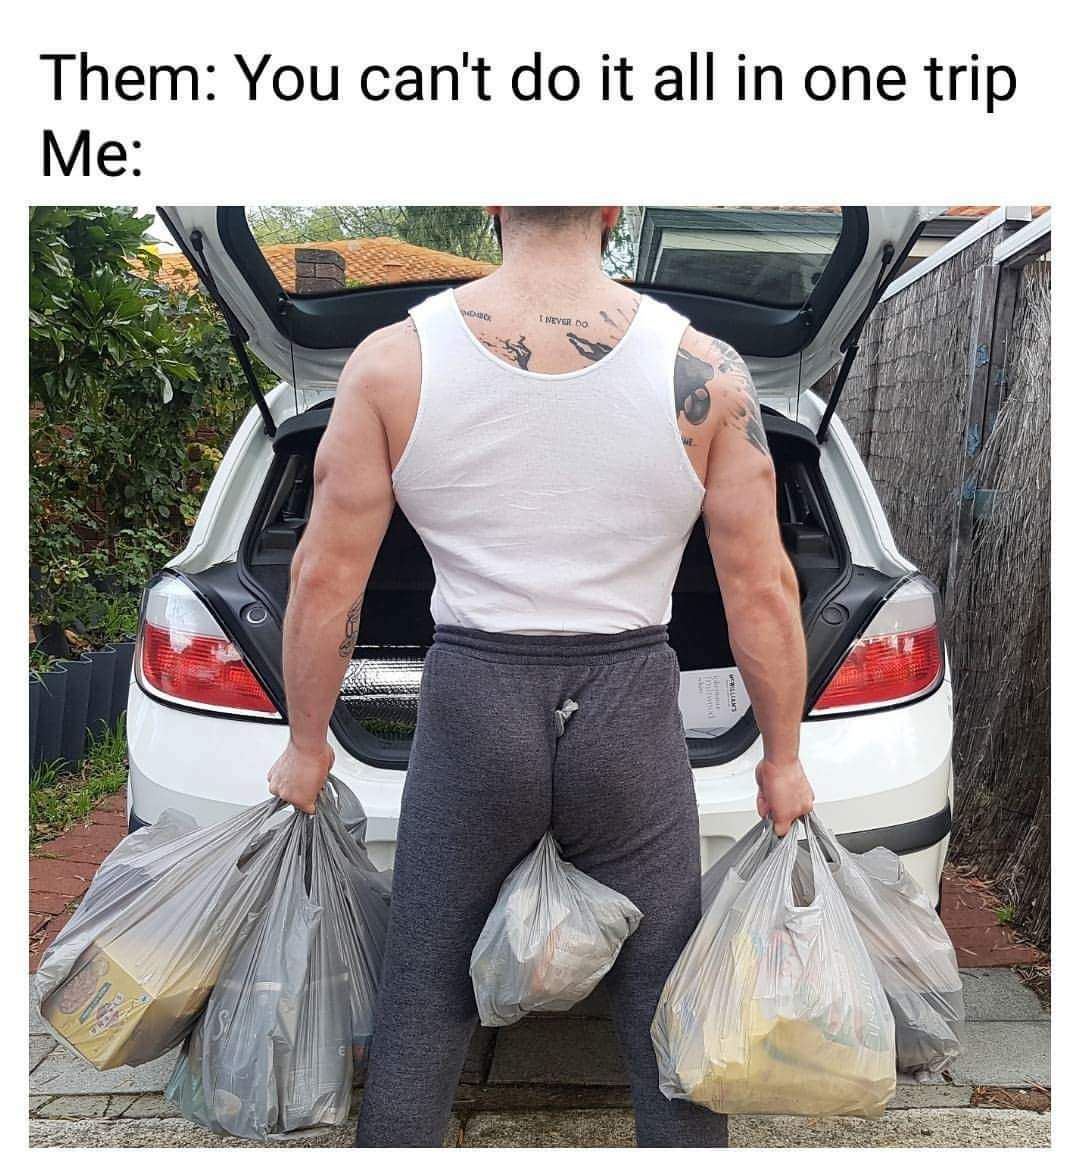 carrying all the bags in one trip